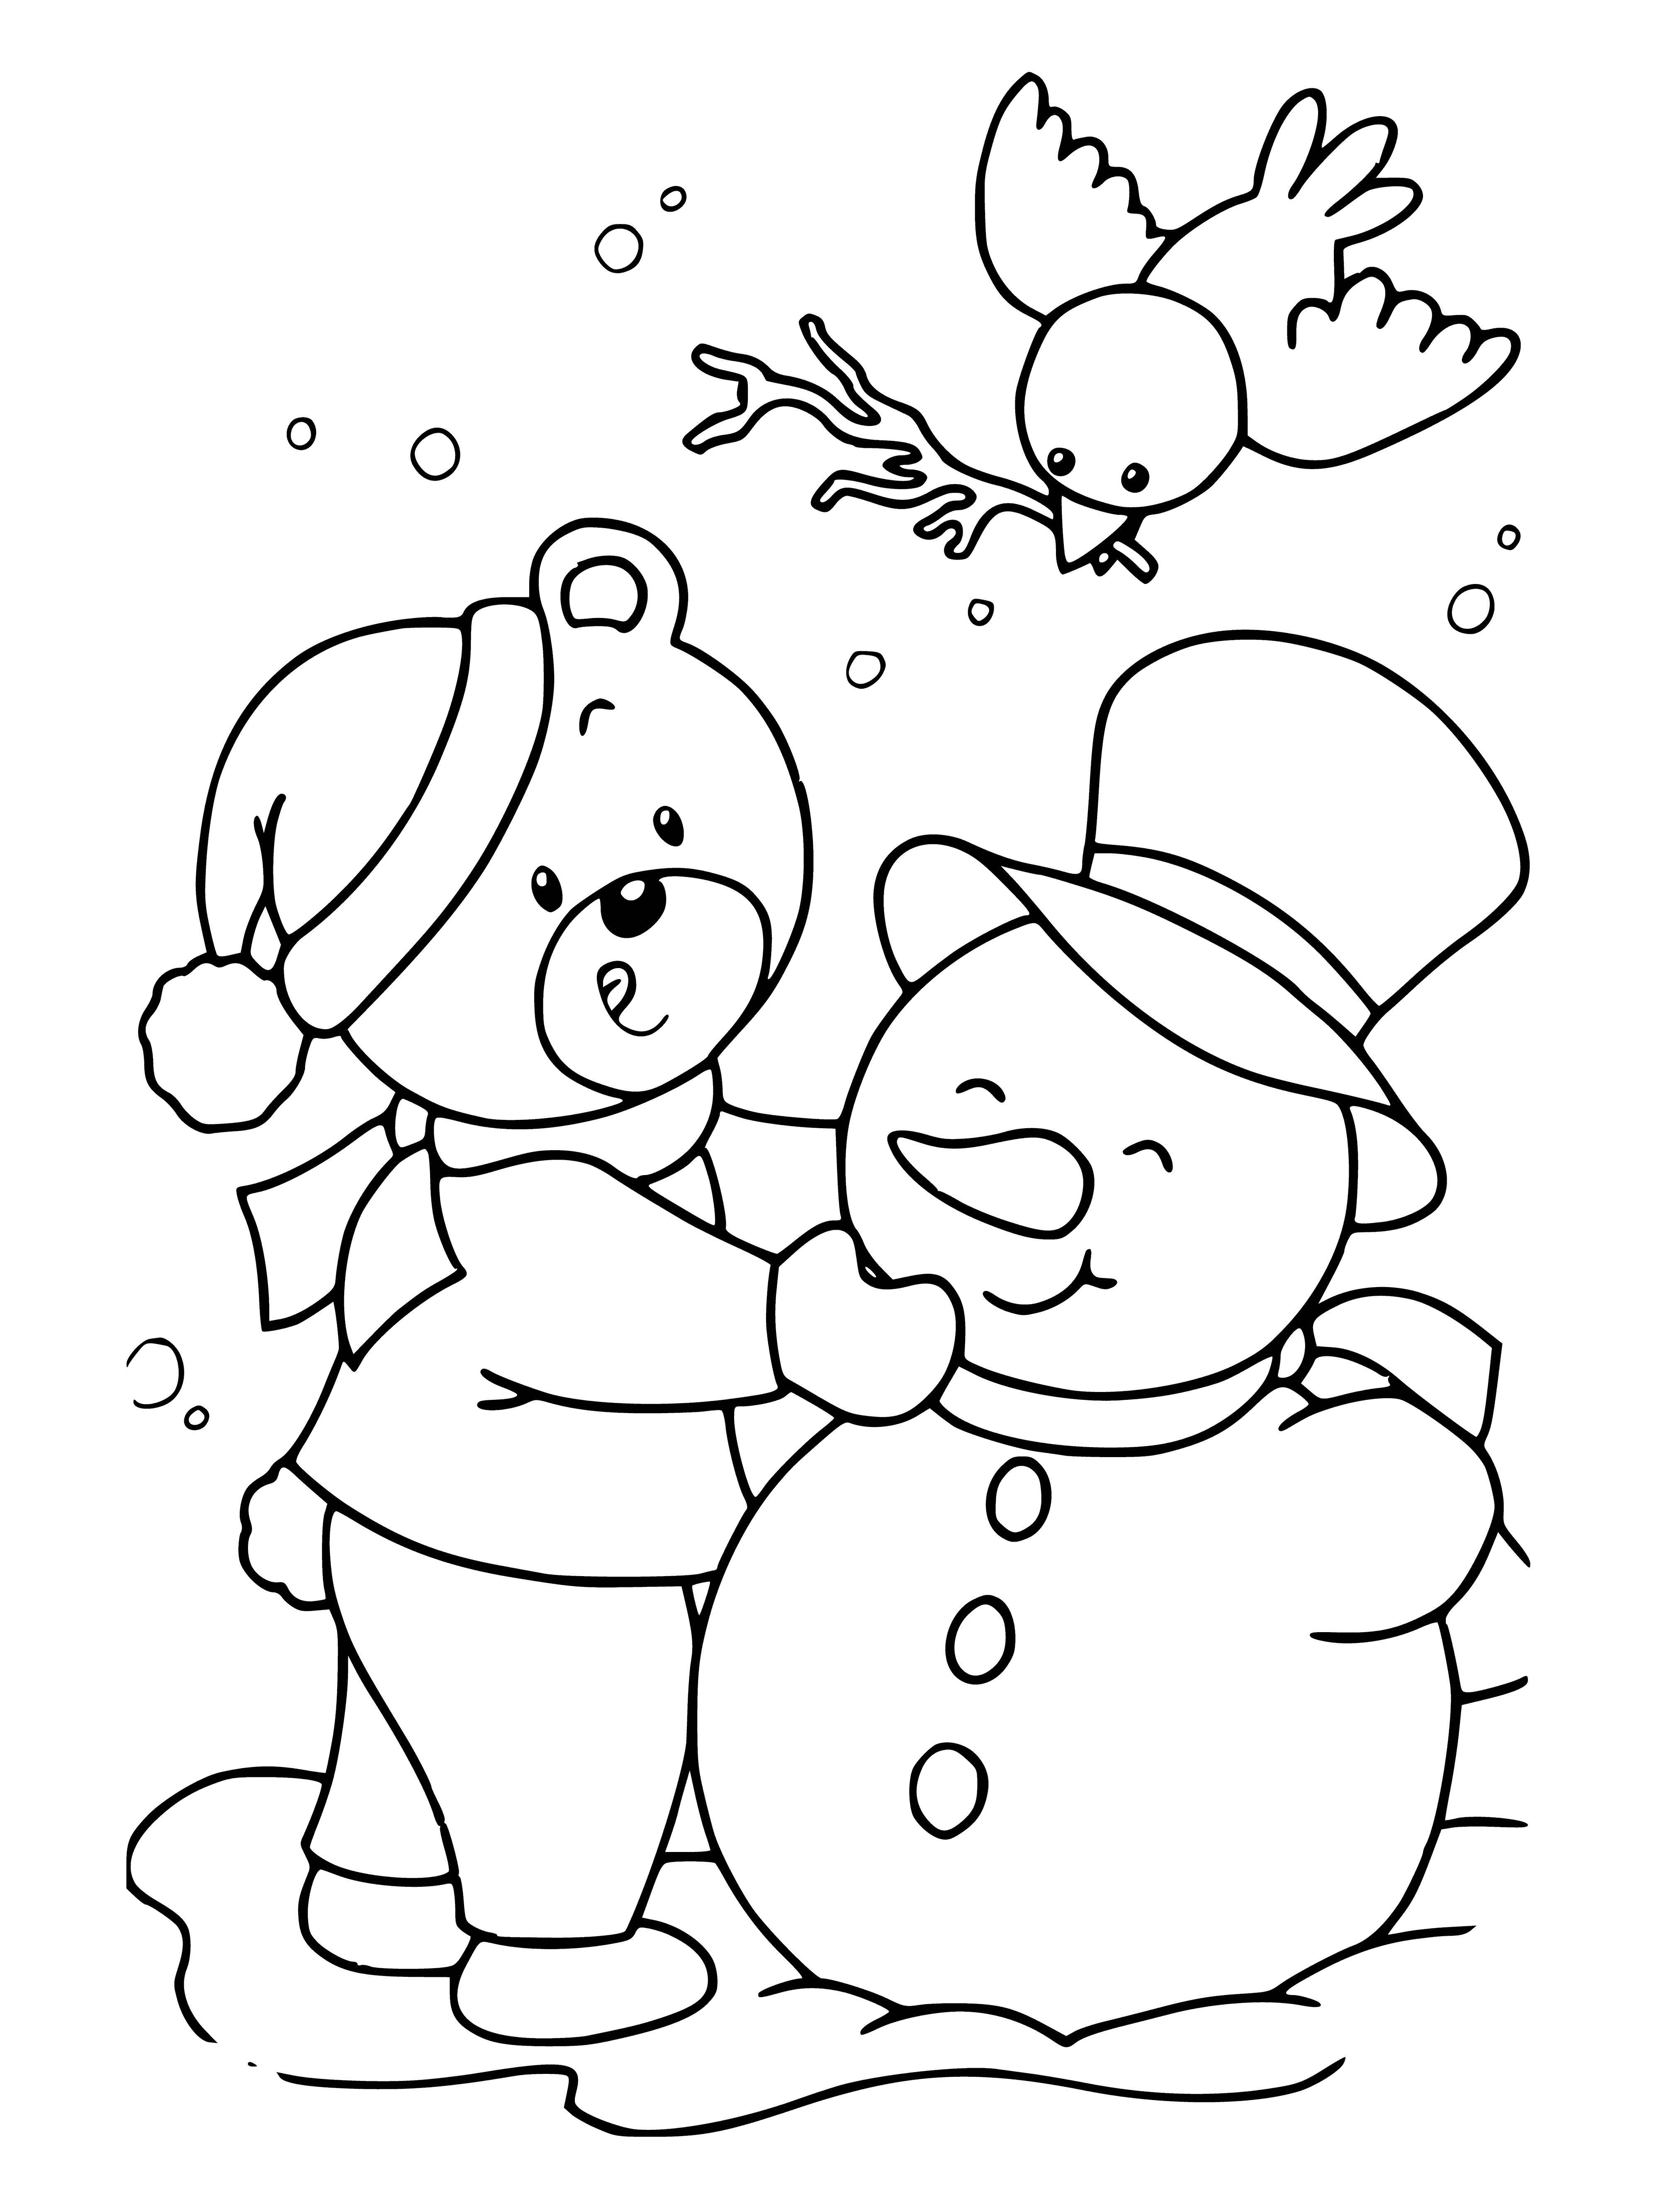 coloring page: Teddy is sculpting a snowman on a sunny winter day; having loads of fun crafting a work of art.